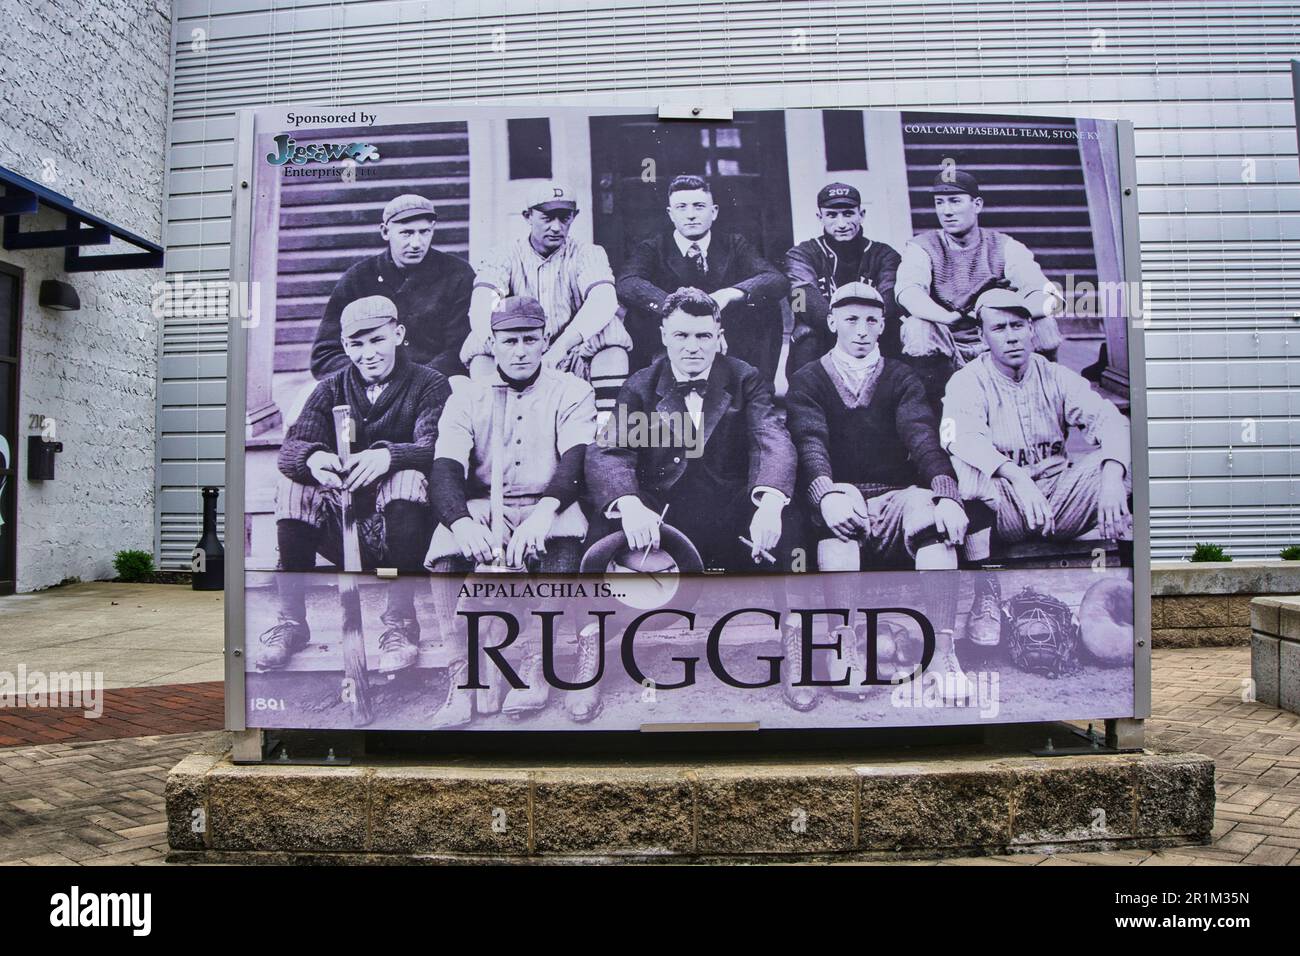 Street art in Pikeville Ky Coal Company baseball team image Stock Photo